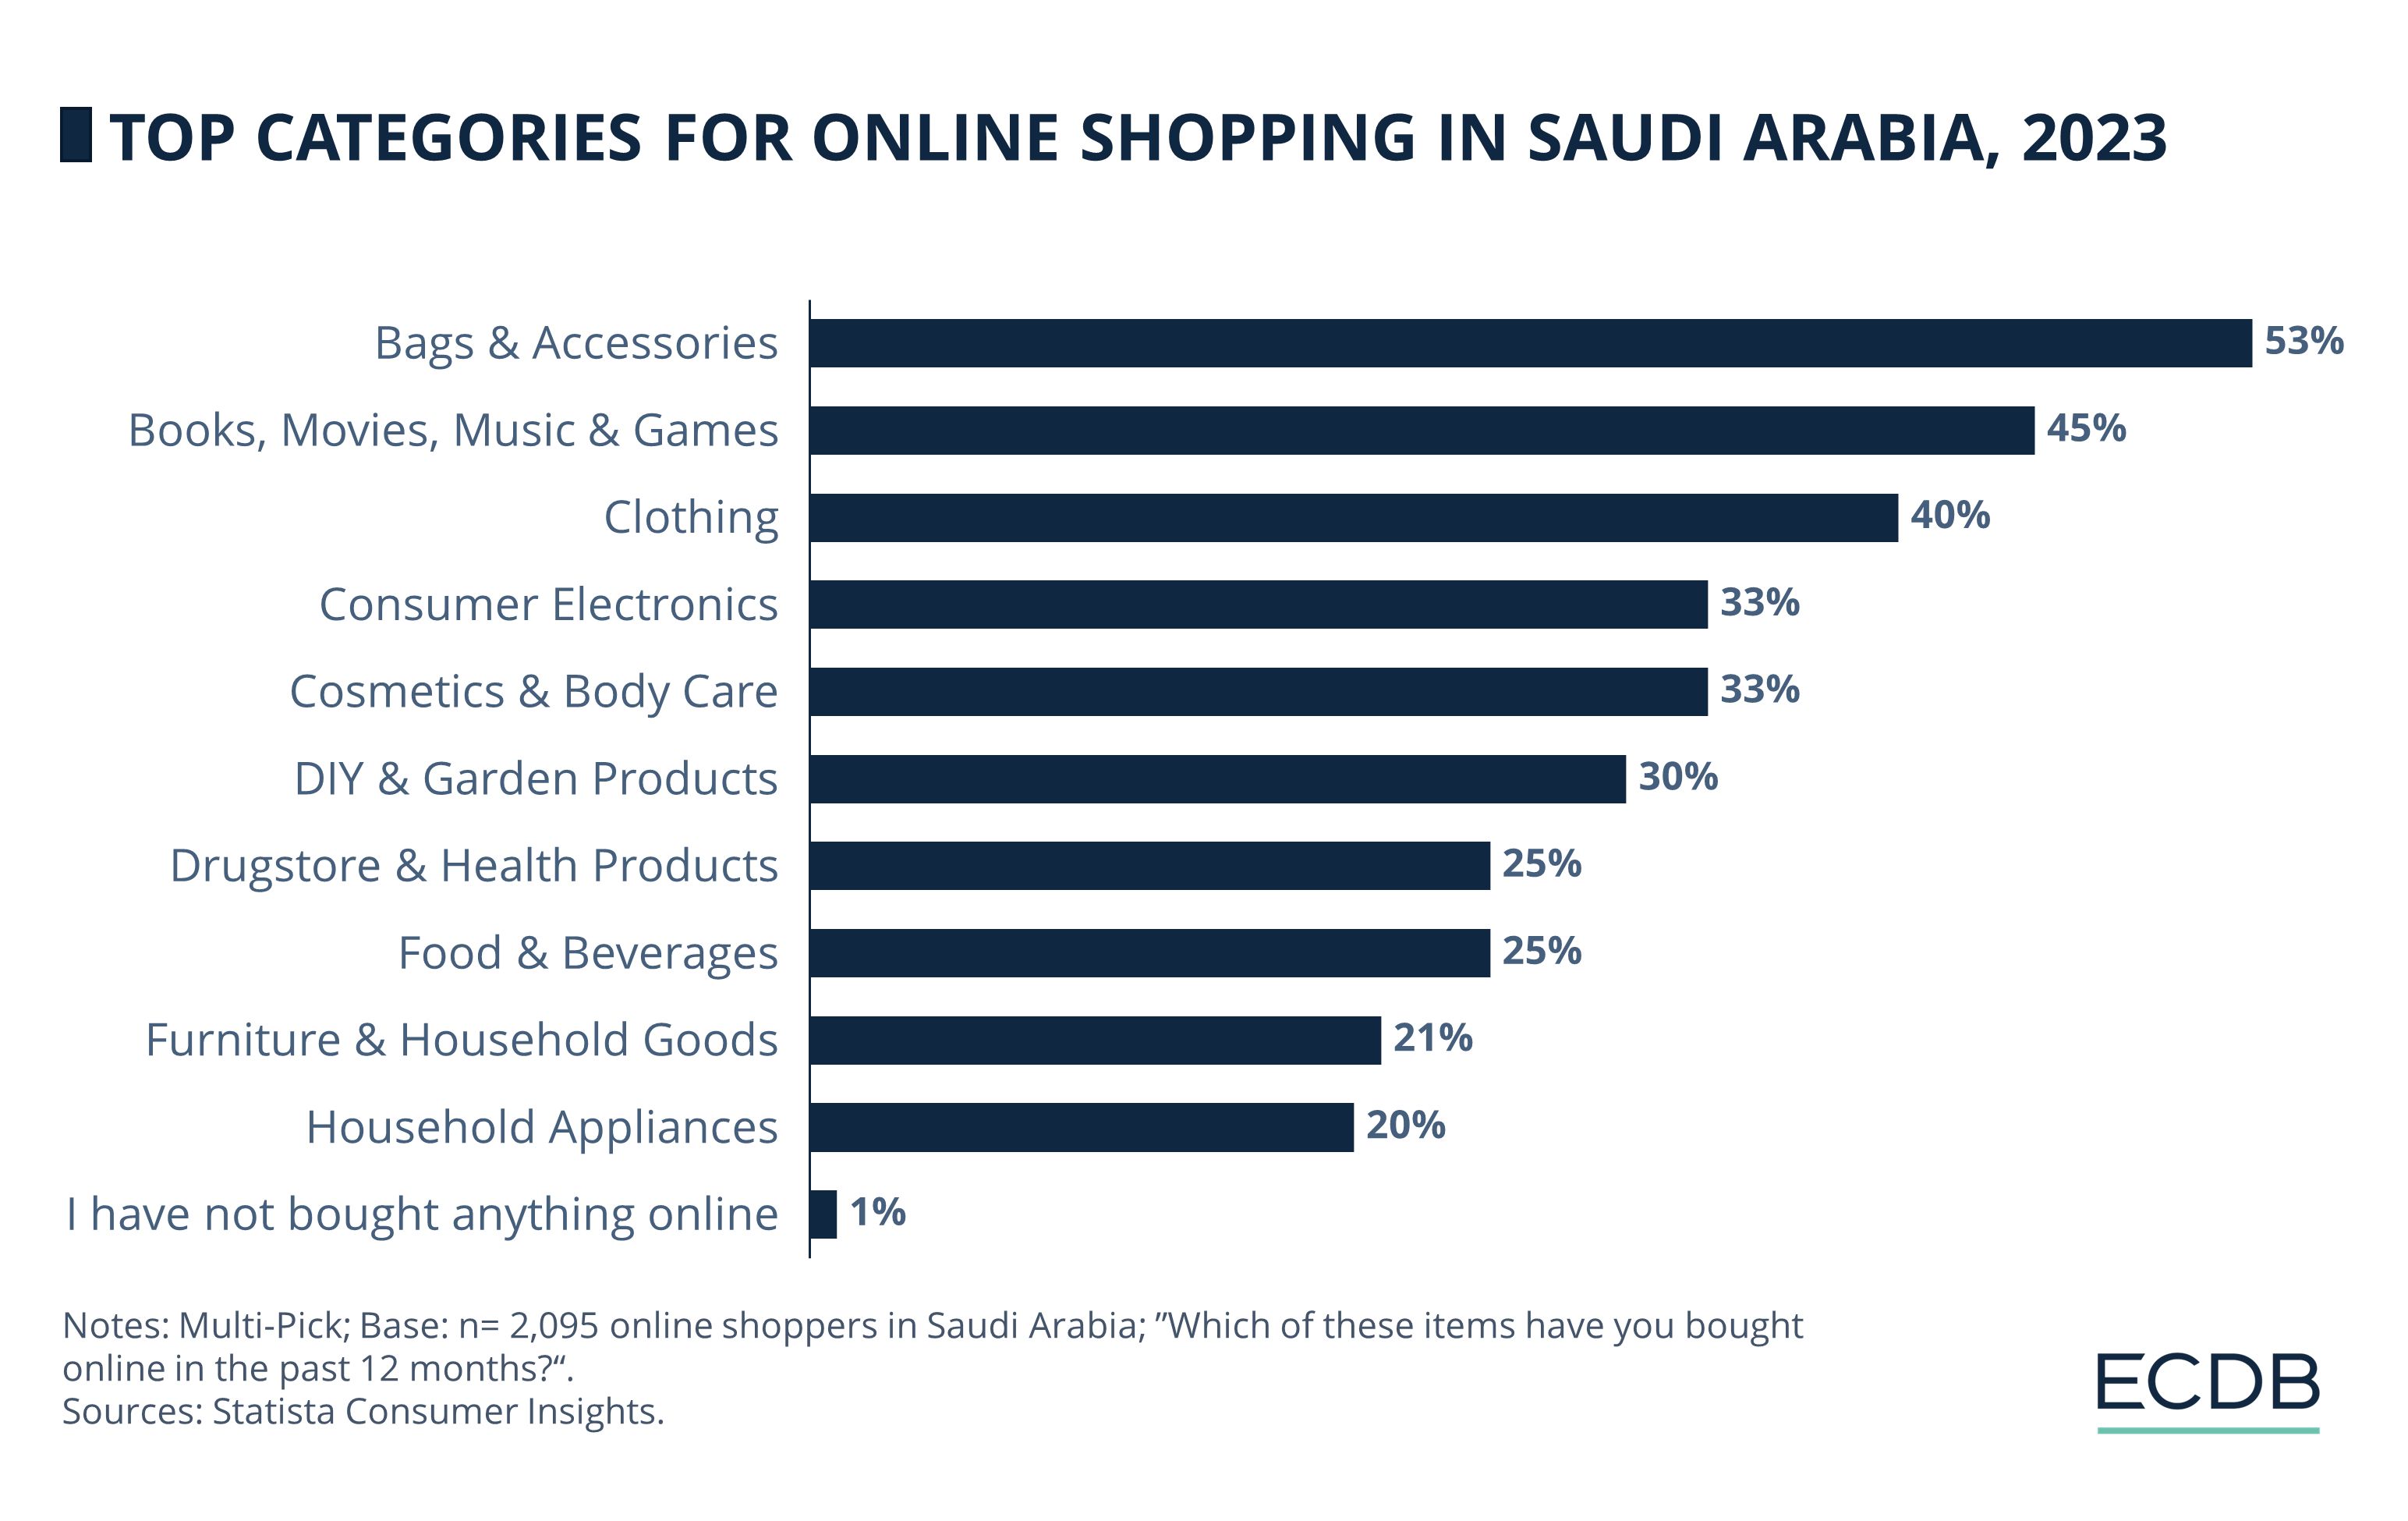 Top Categories for Online Shopping in Saudi Arabia, 2023